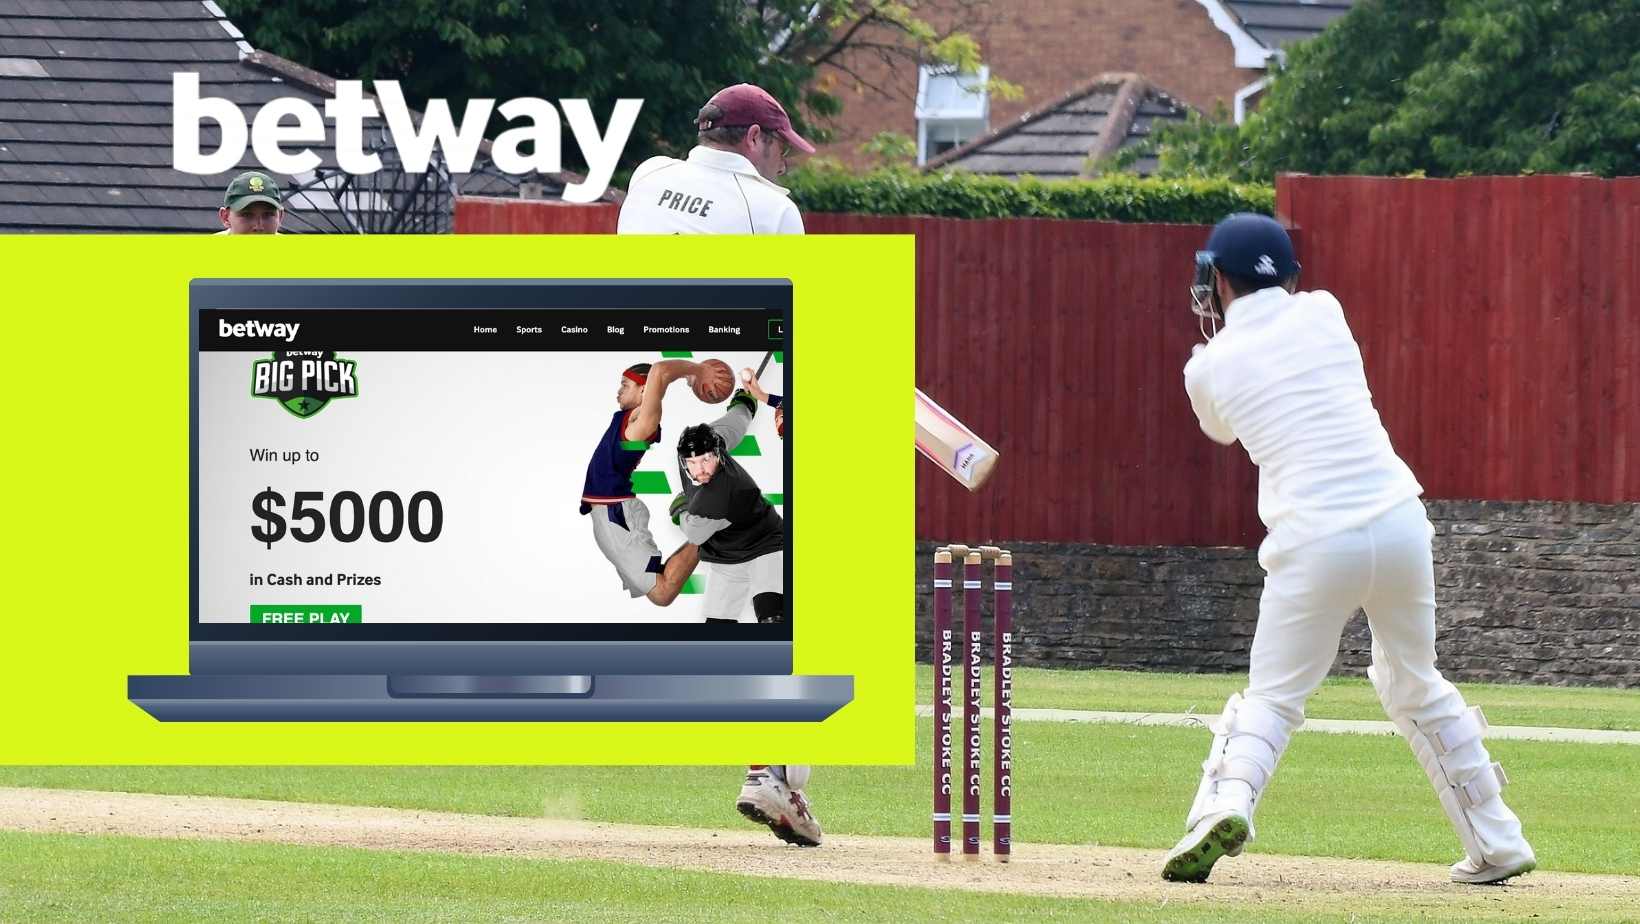 Betway bookmaker is a great place to bet on cricket in India